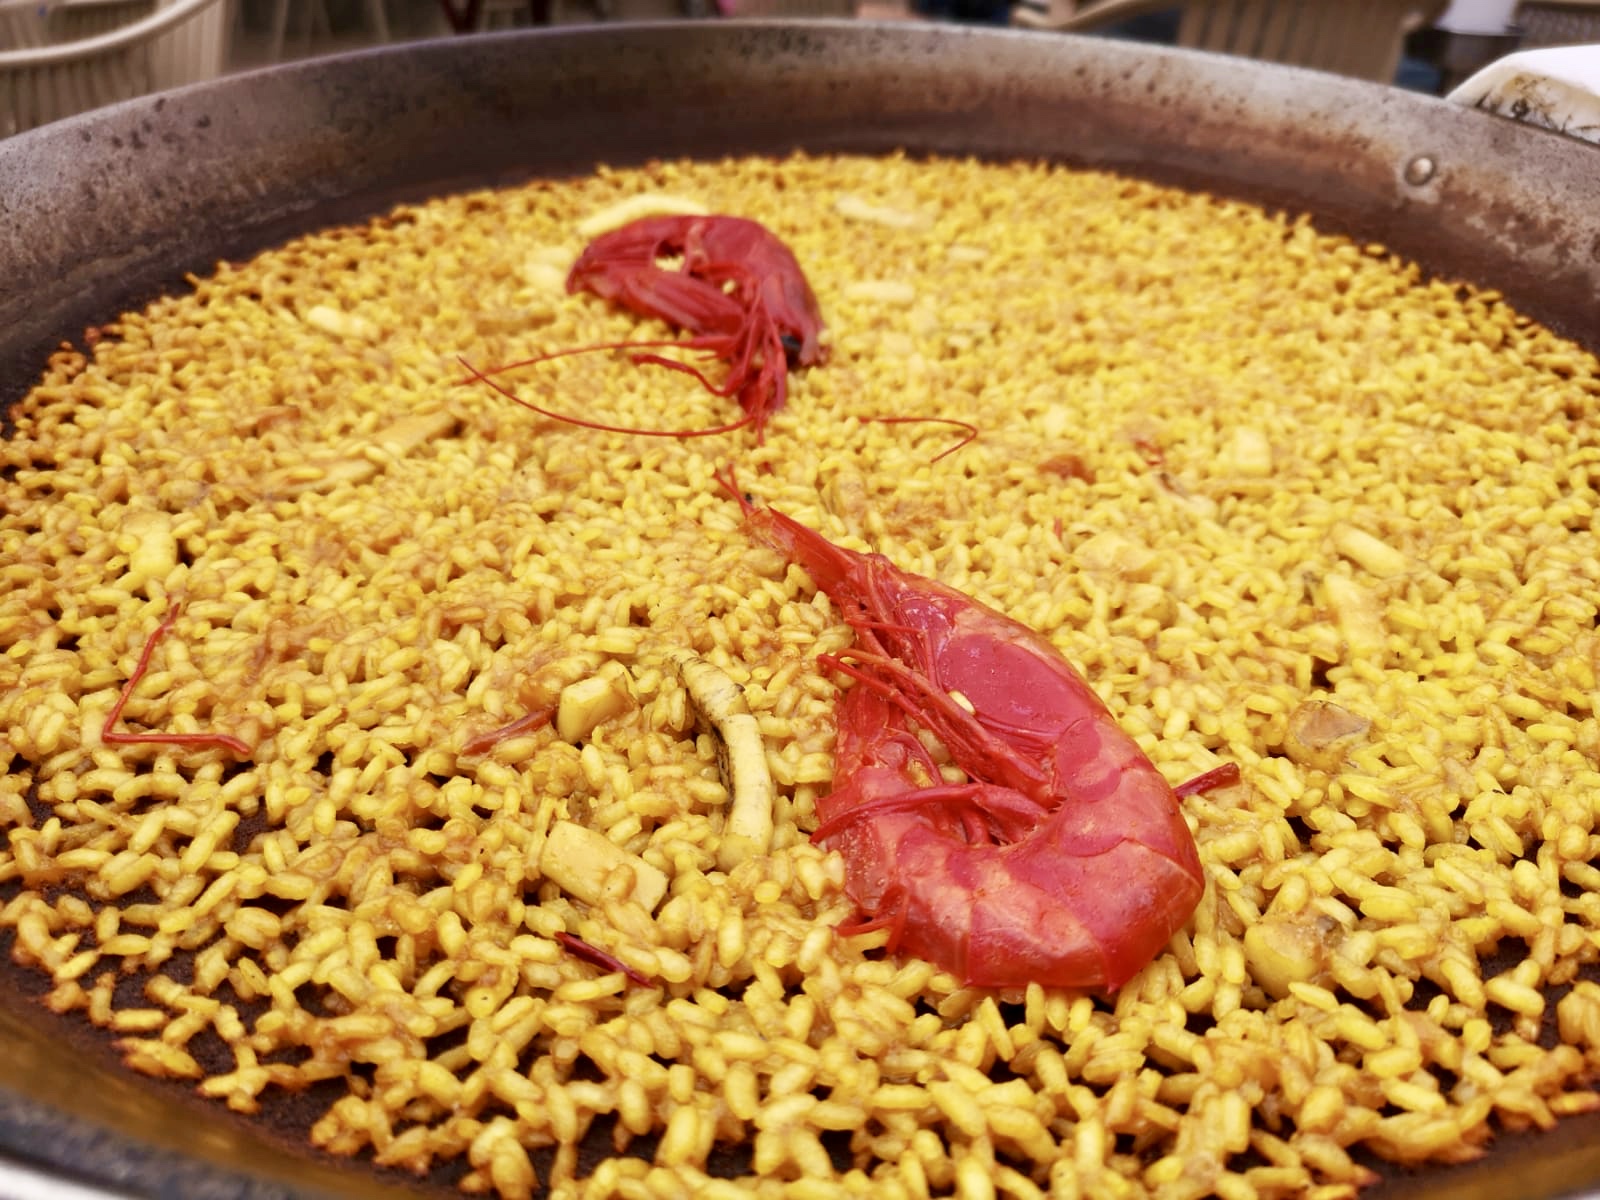 It's so hard to choose the best paella when there are so many delicious varieties!